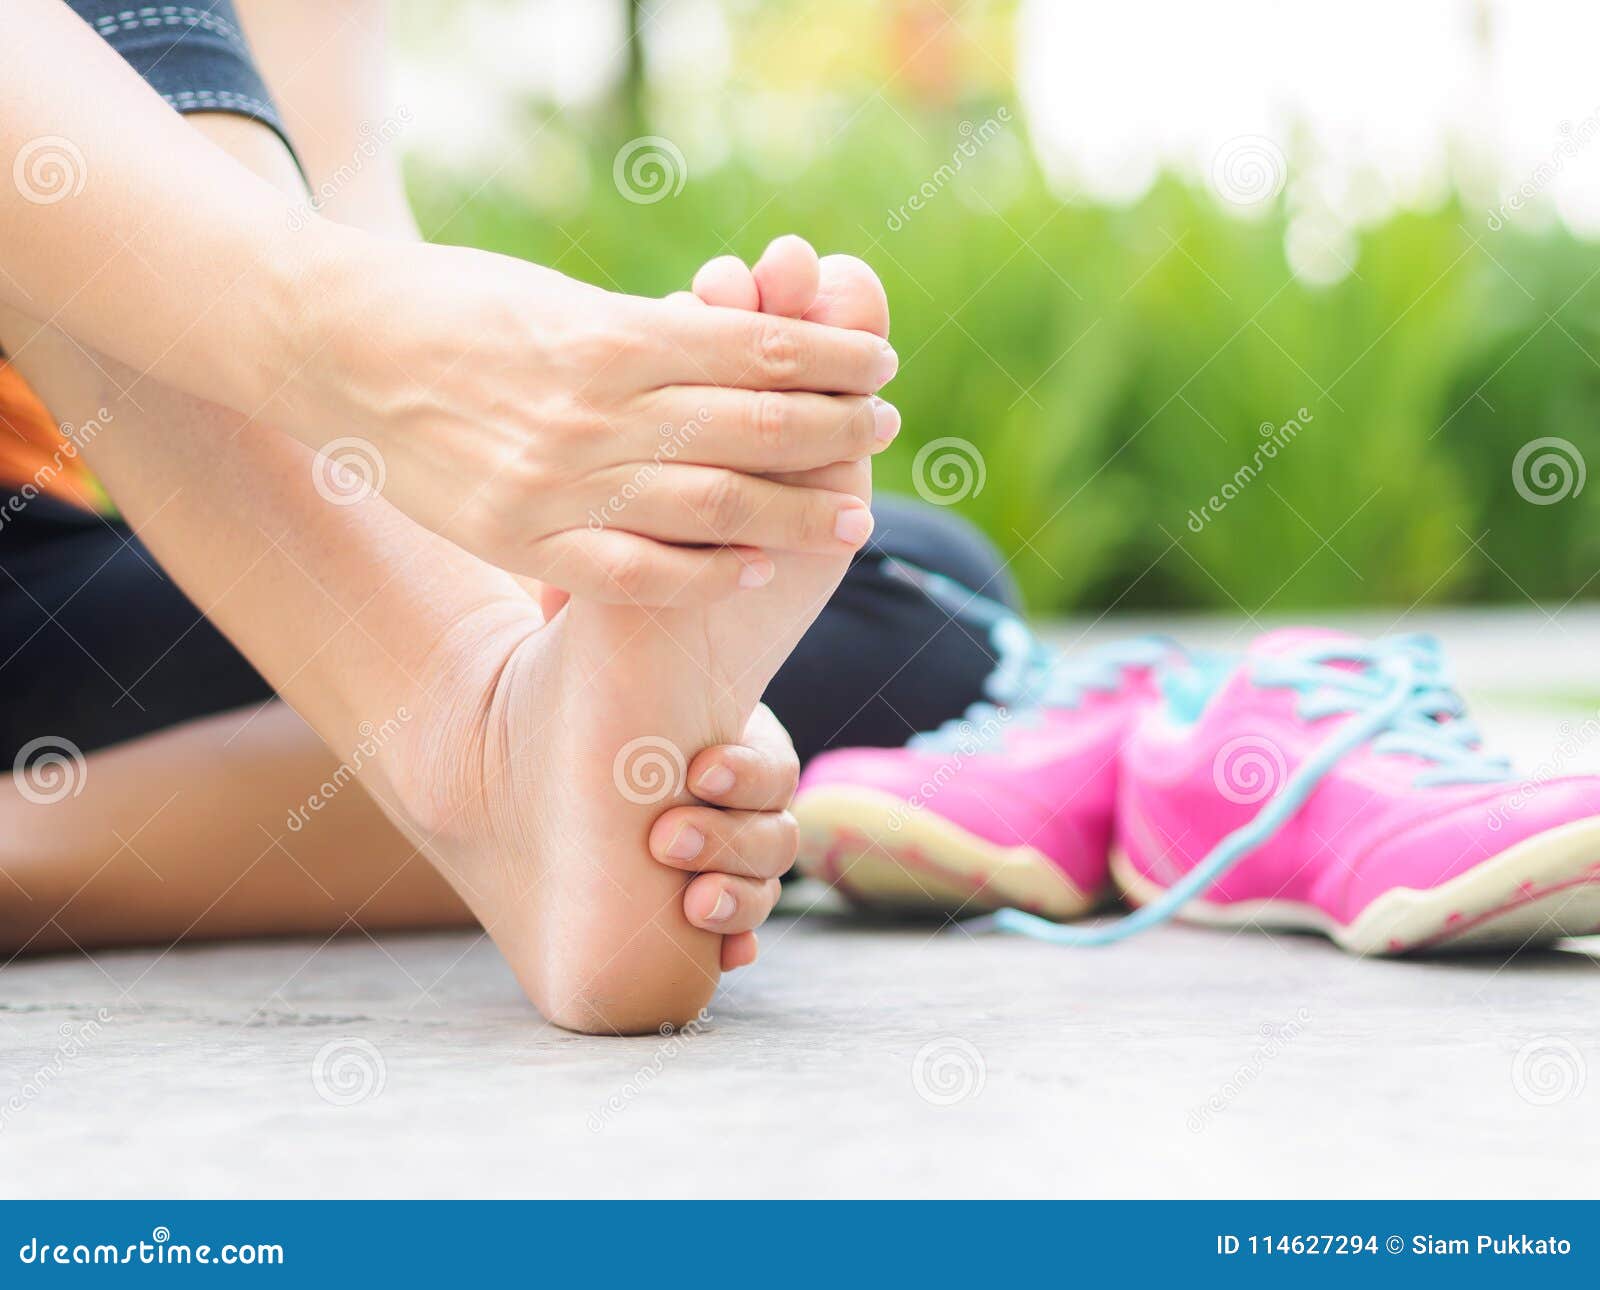 soft focus woman massaging her painful foot while exercising.